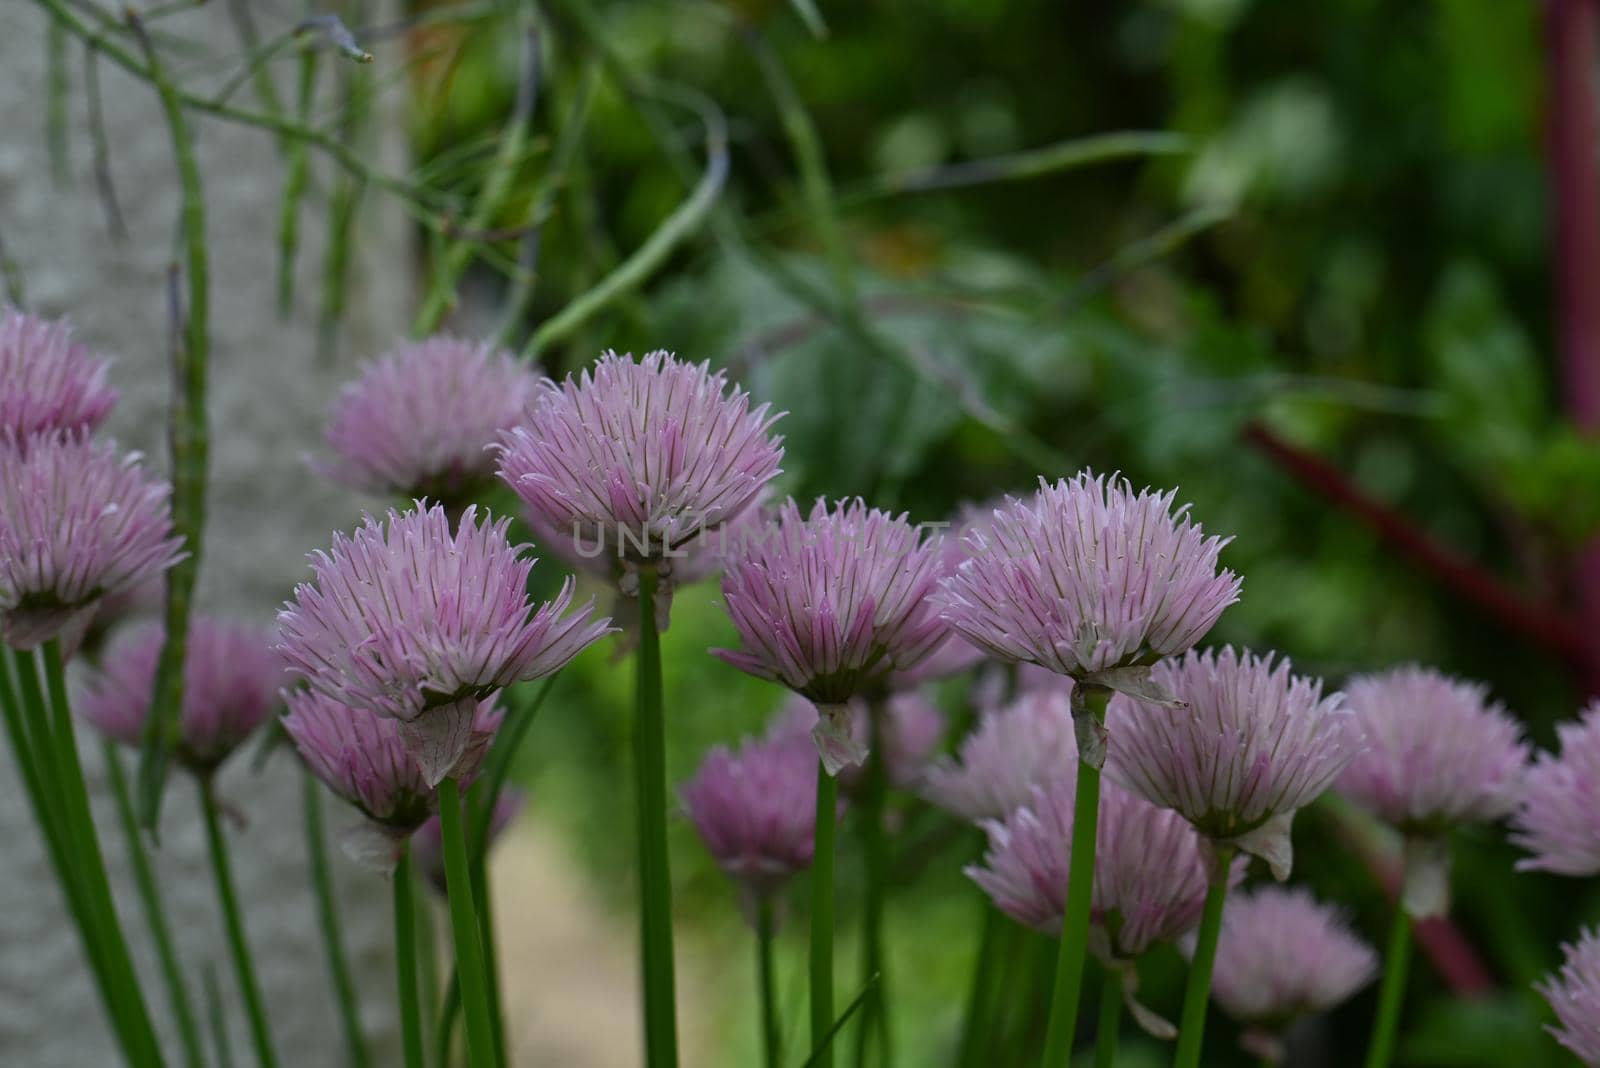 Flowering chives in the garden as a close up by Luise123